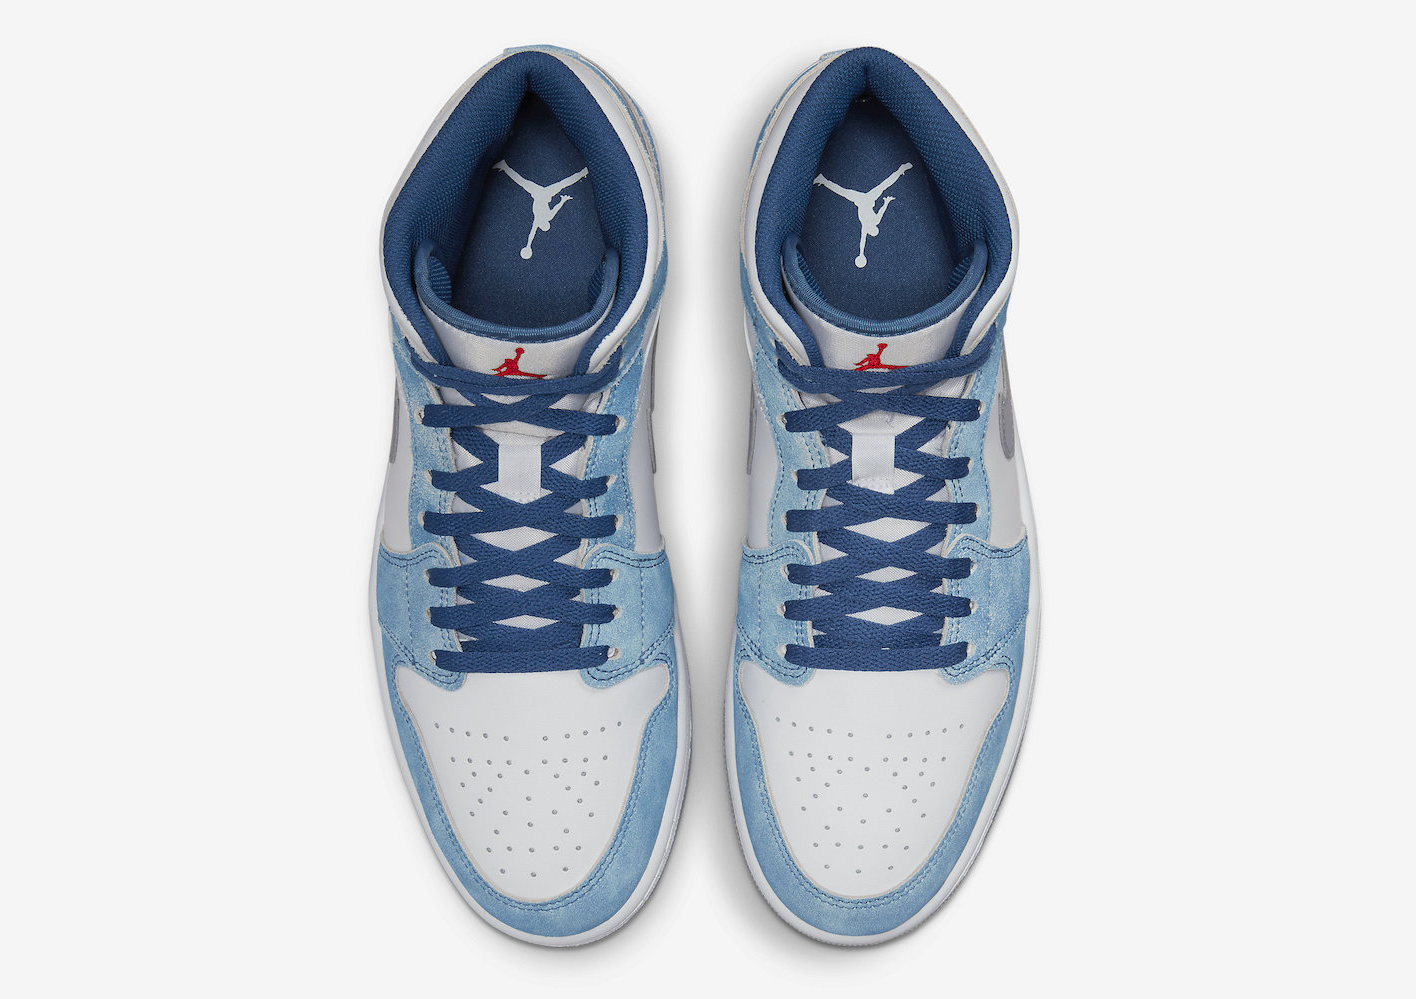 Air Jordan 1 Mid 'French Blue Fire Red'